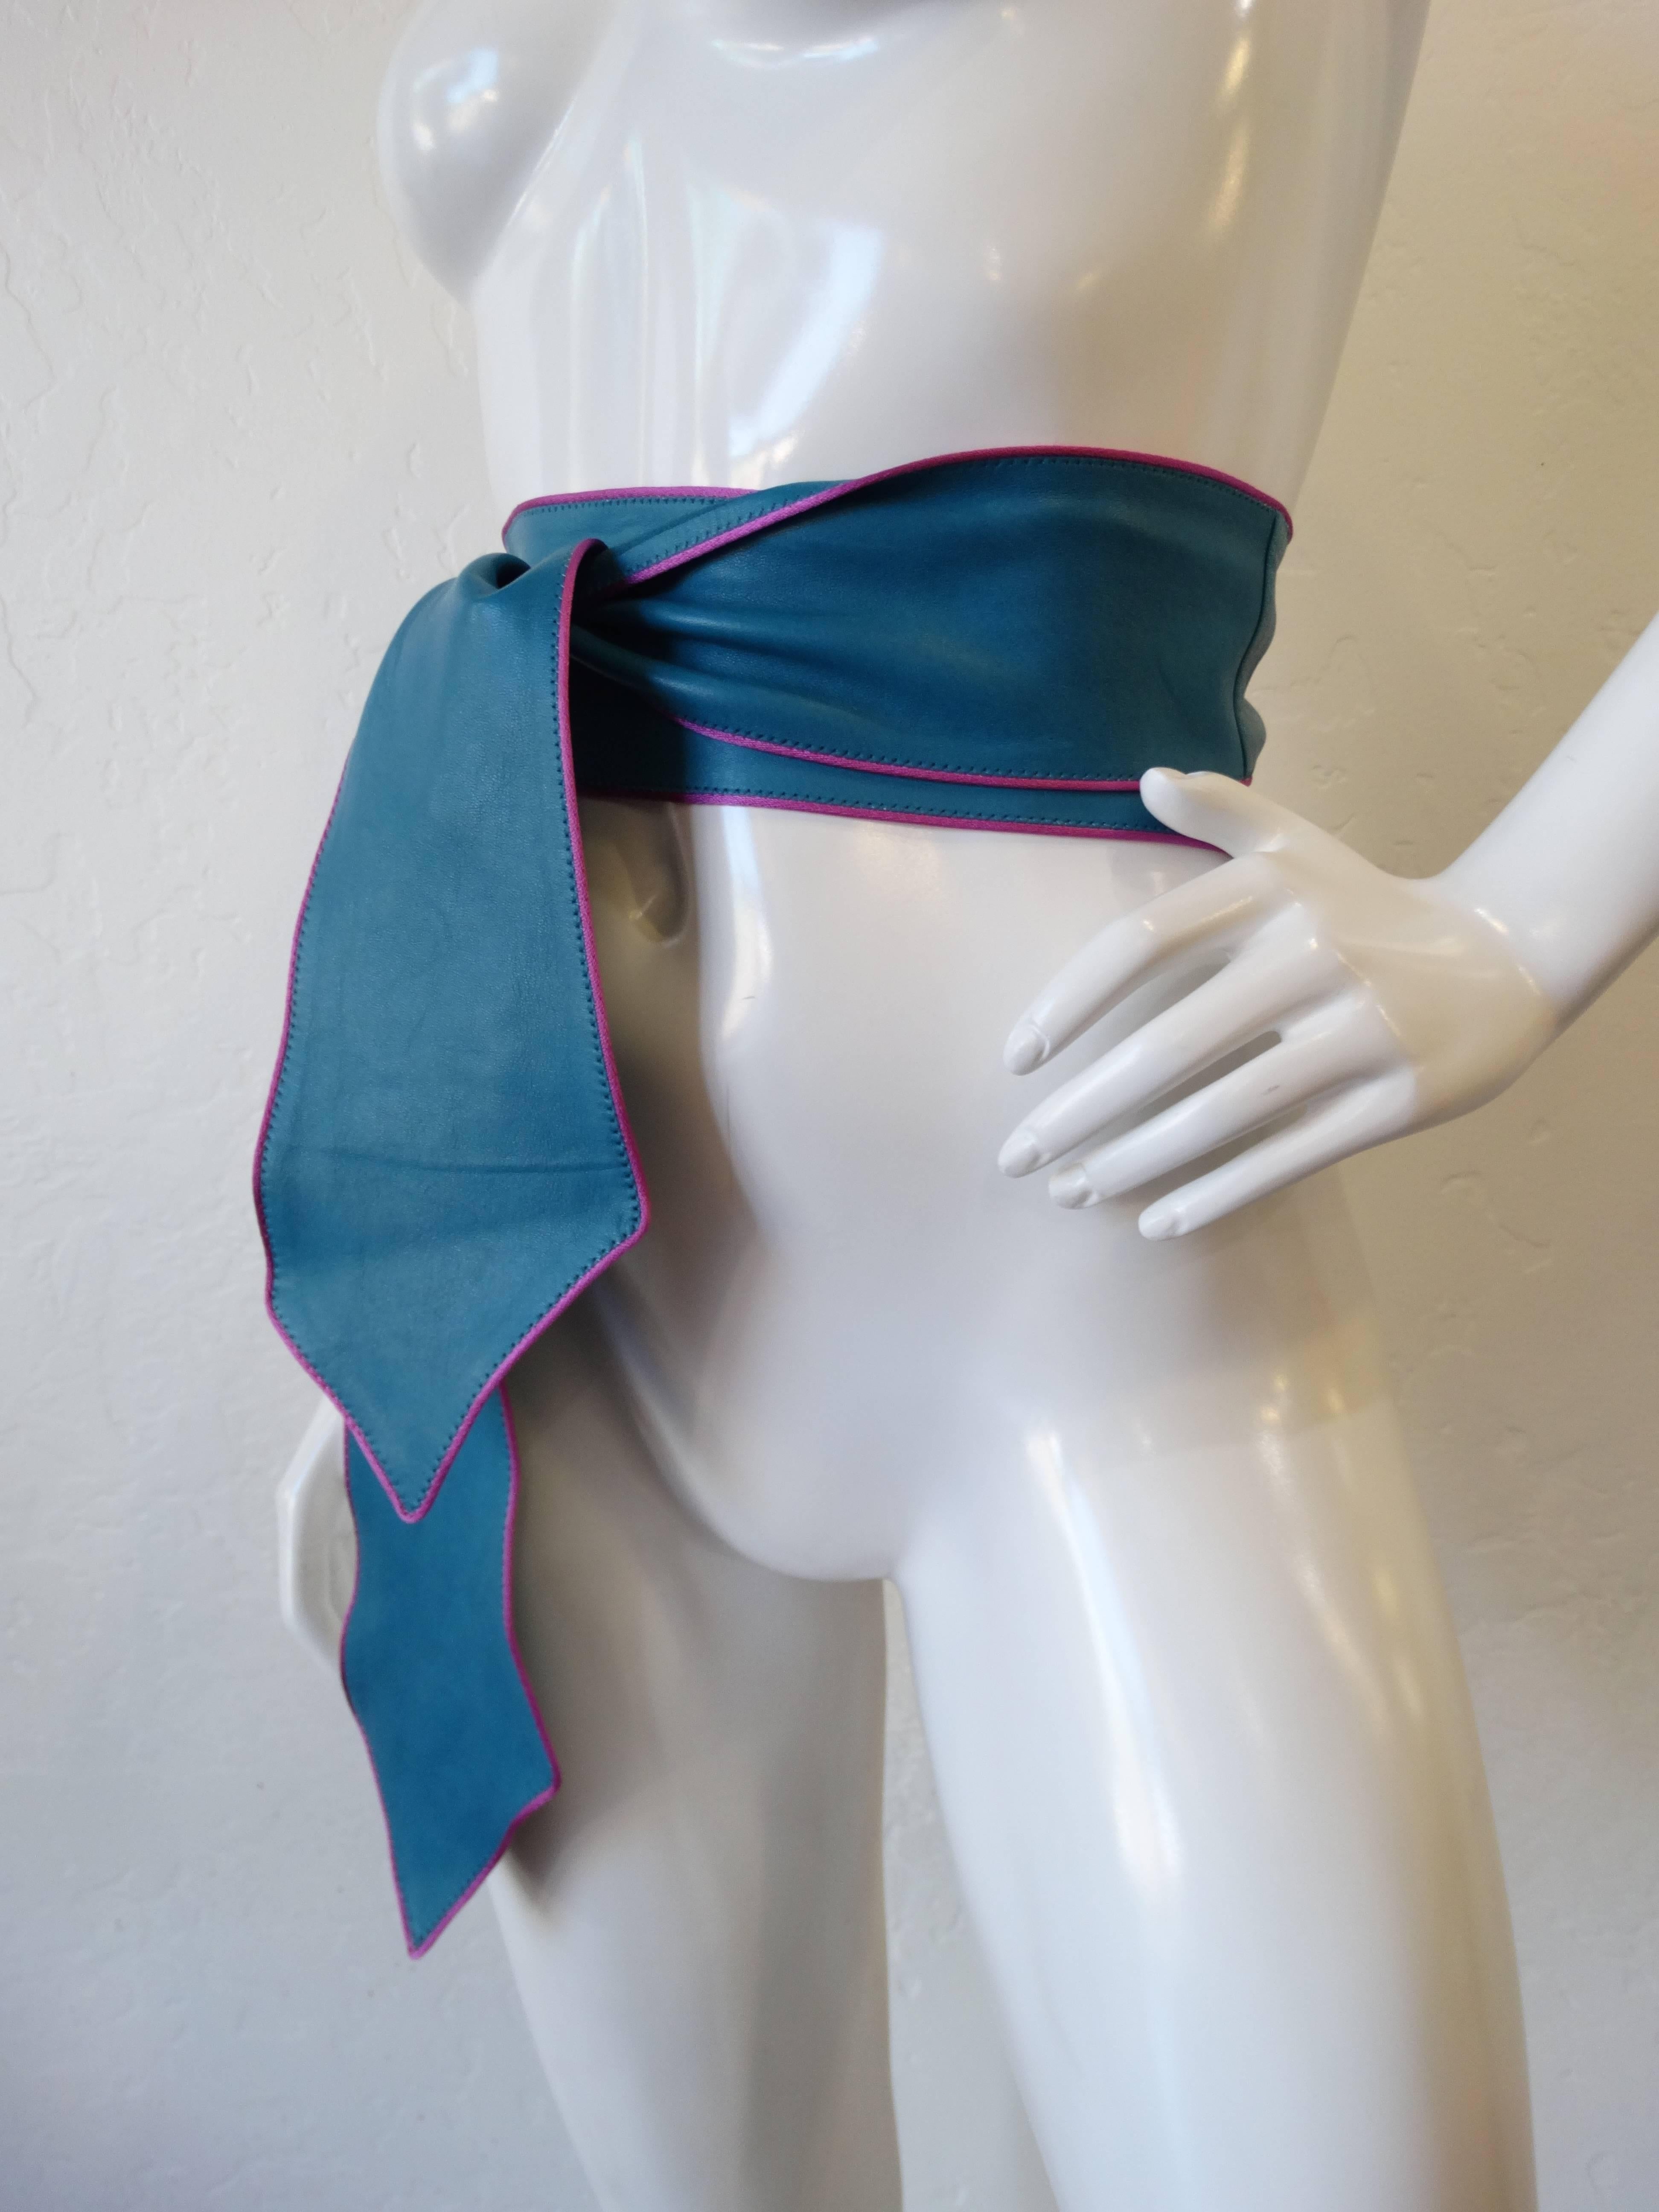 Add some color to your outfit with our blue wrap belt from iconic designer Emanuel Ungaro! Super-soft blue leather with purple cord edges. Ties up any way you like it- this piece is super versatile. 

Measures 85”; long
Width: 3.25”